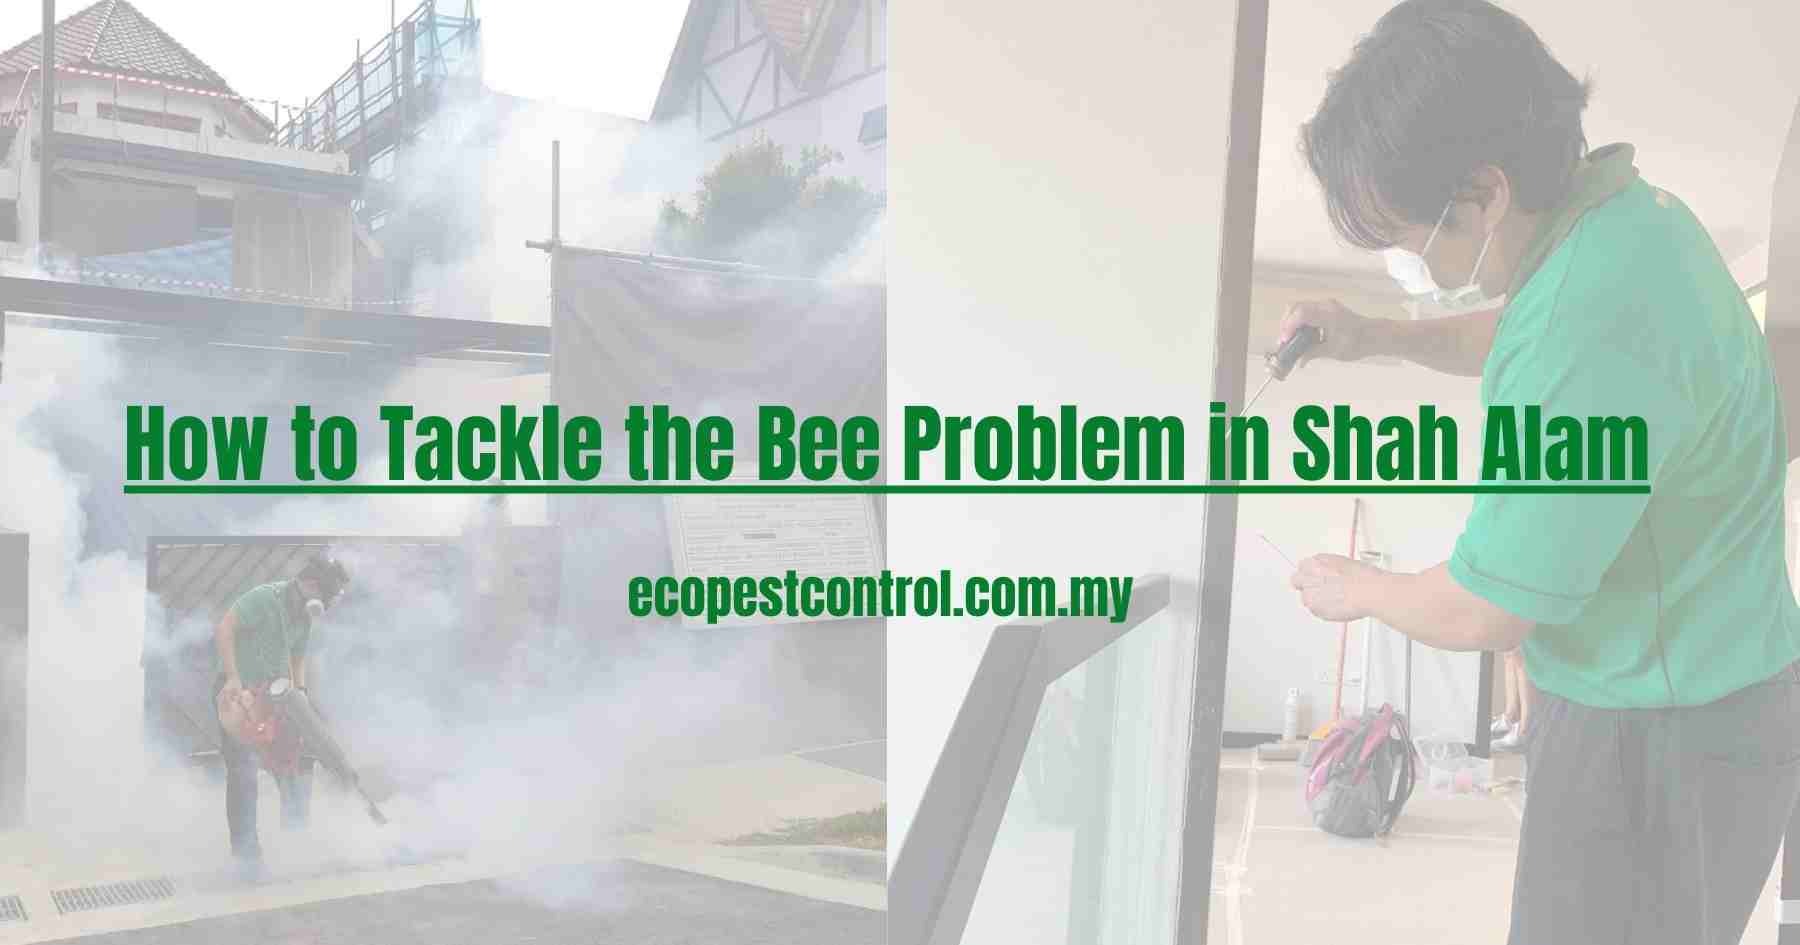 How to Tackle the Bee Problem in Shah Alam